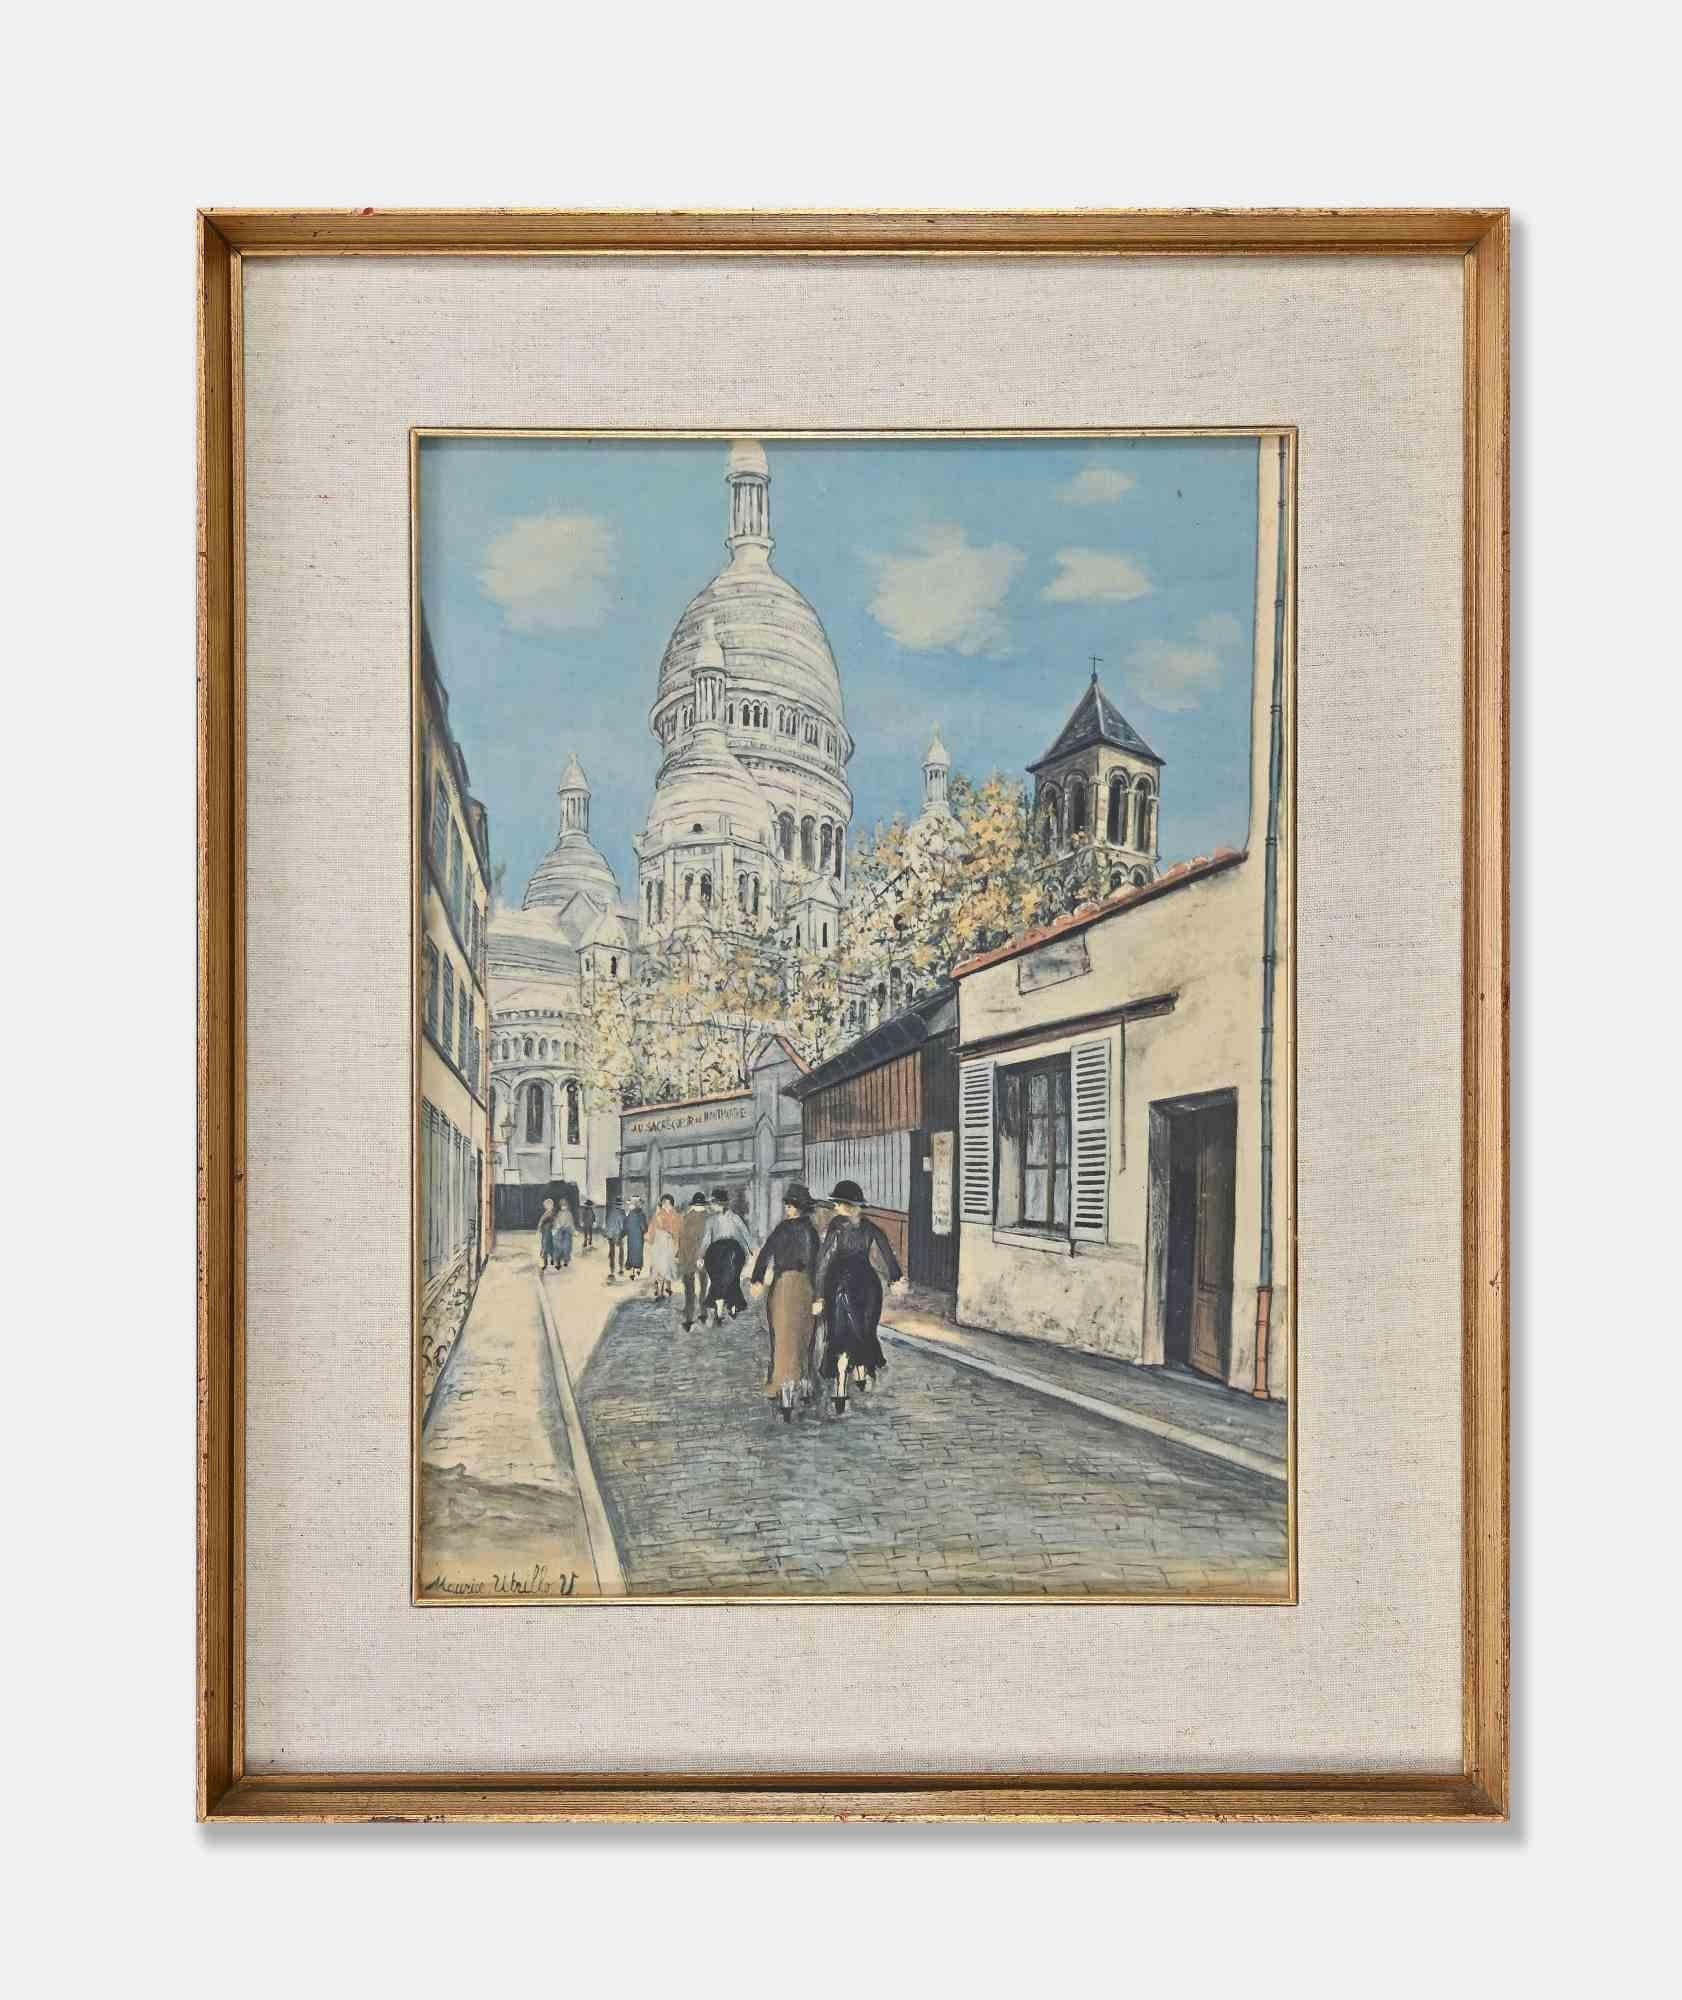 Maurice Utrillo Figurative Print - Walk Downtown - Offset and Lithograph after M. Utrillo - Mid 20th century